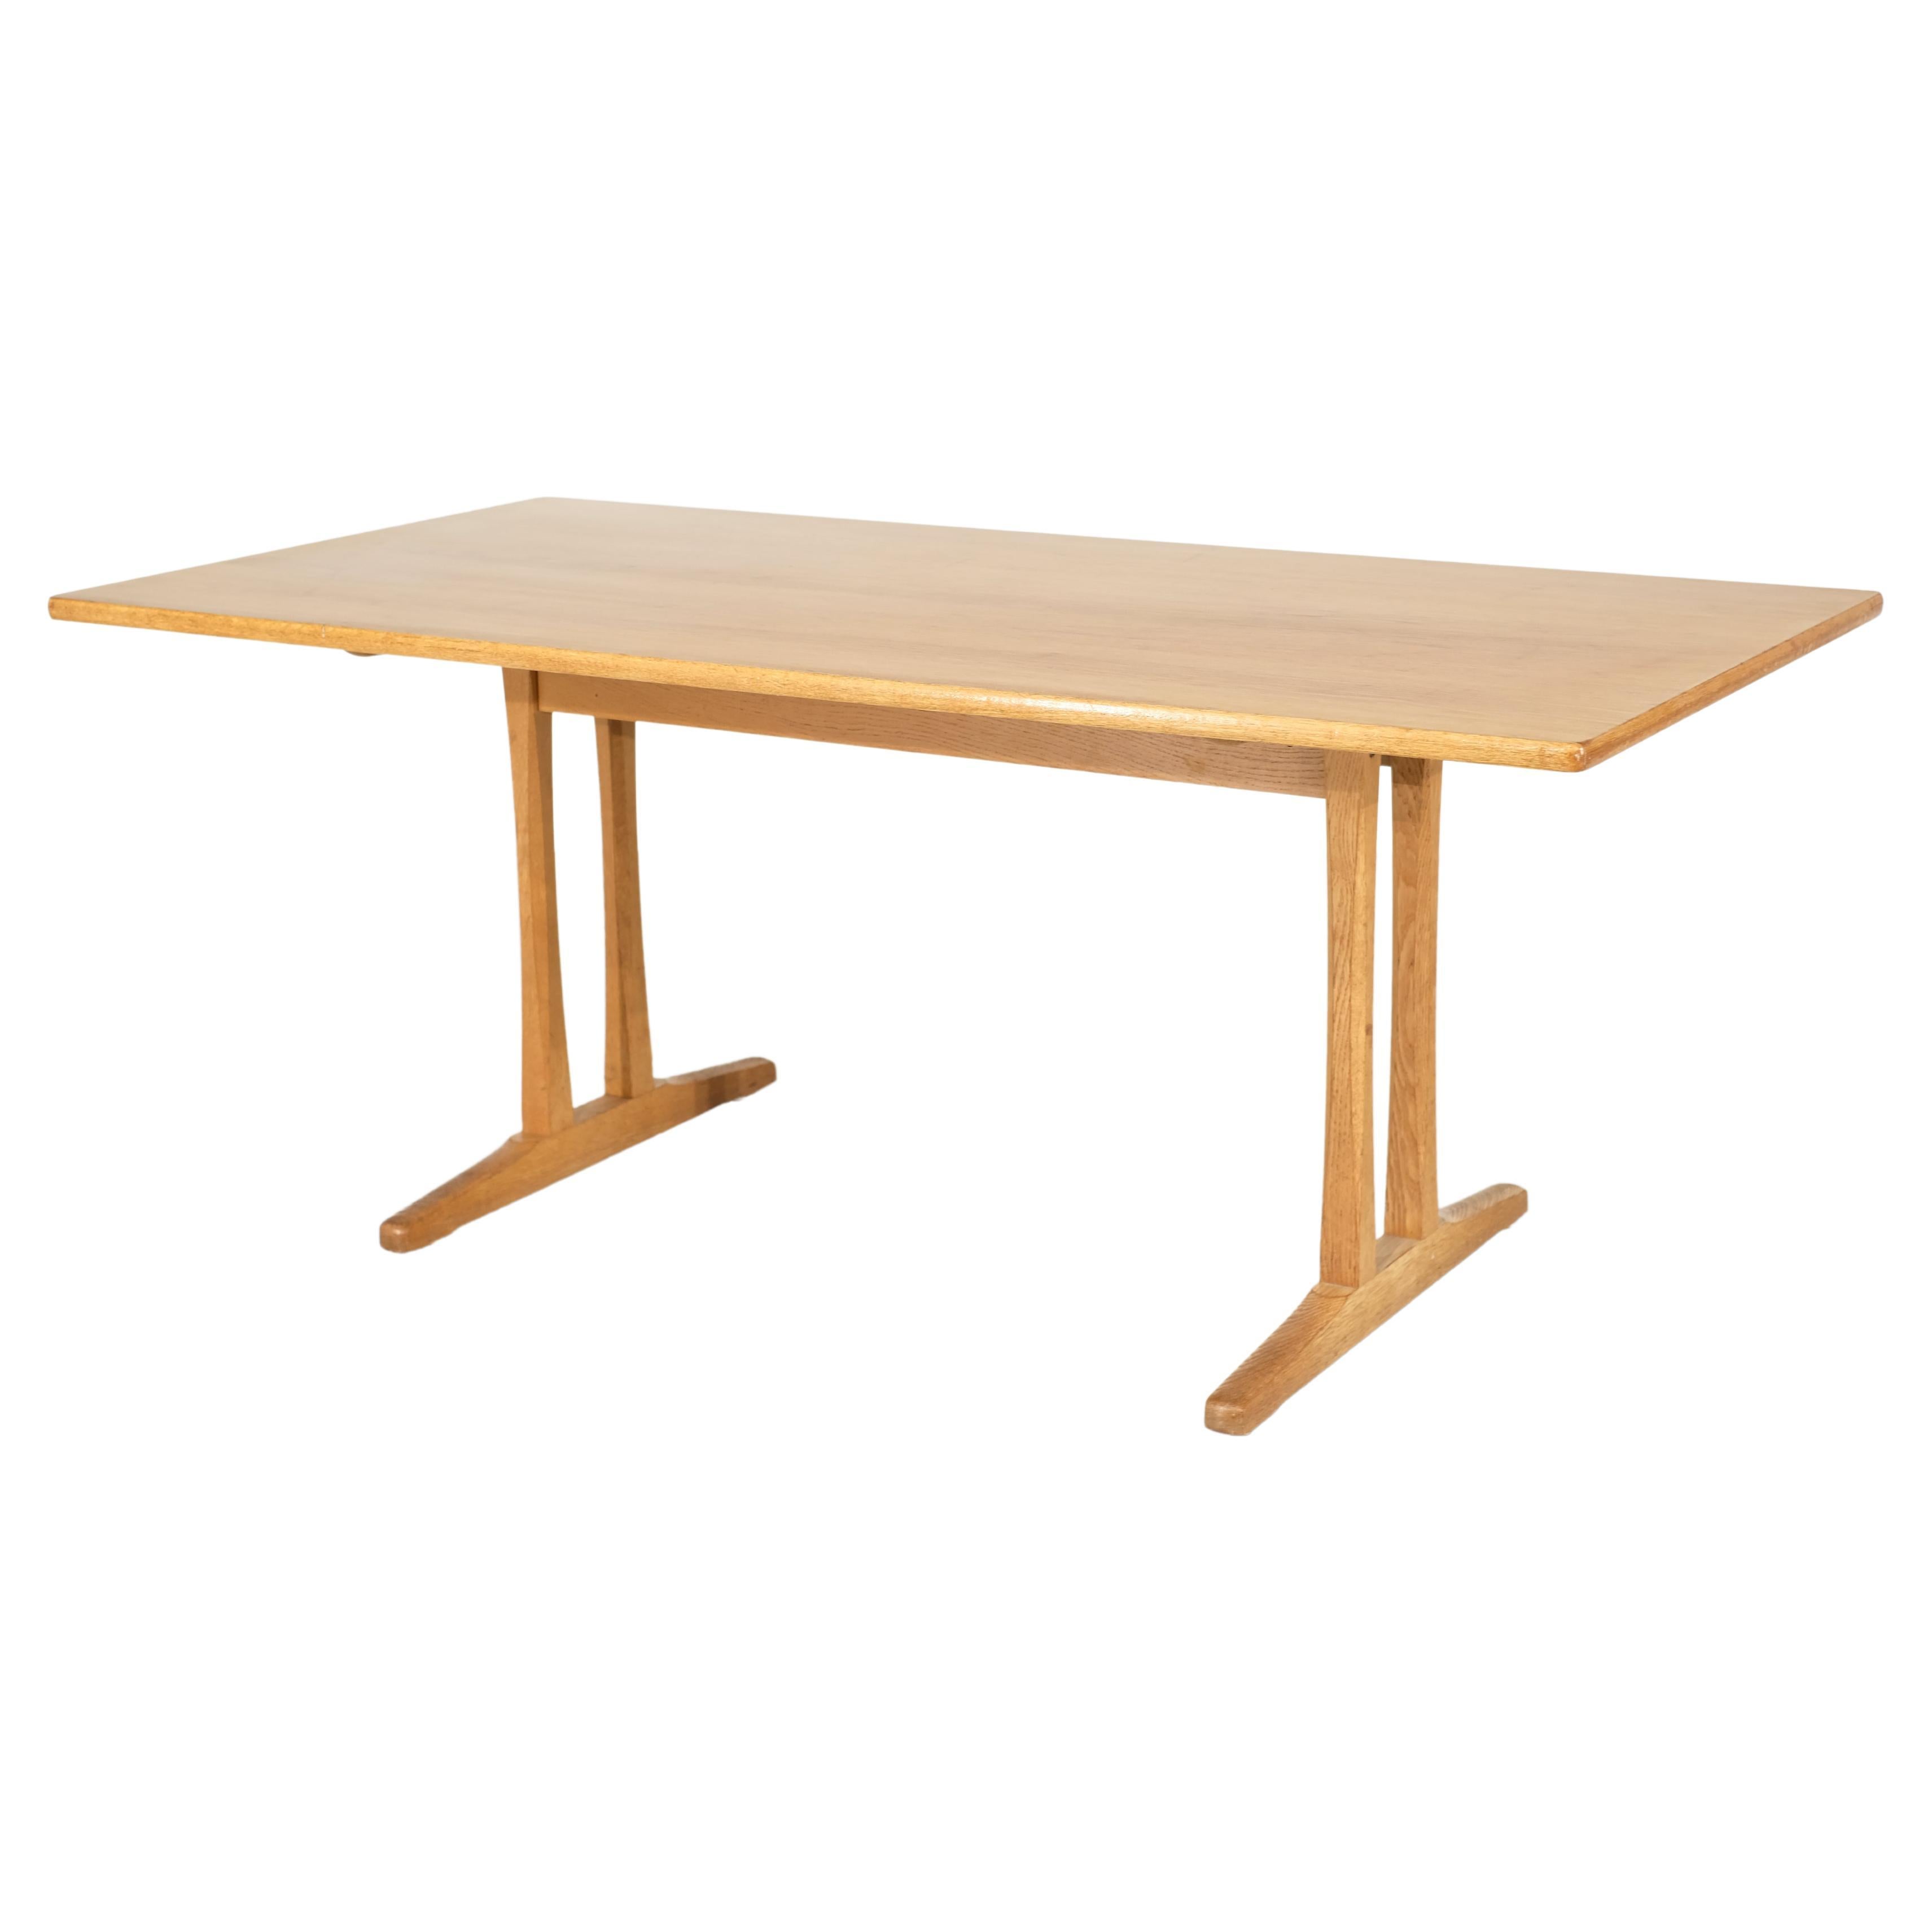 C18 Shaker table by Borge Mogensen for FDB Mobler - 1950s For Sale